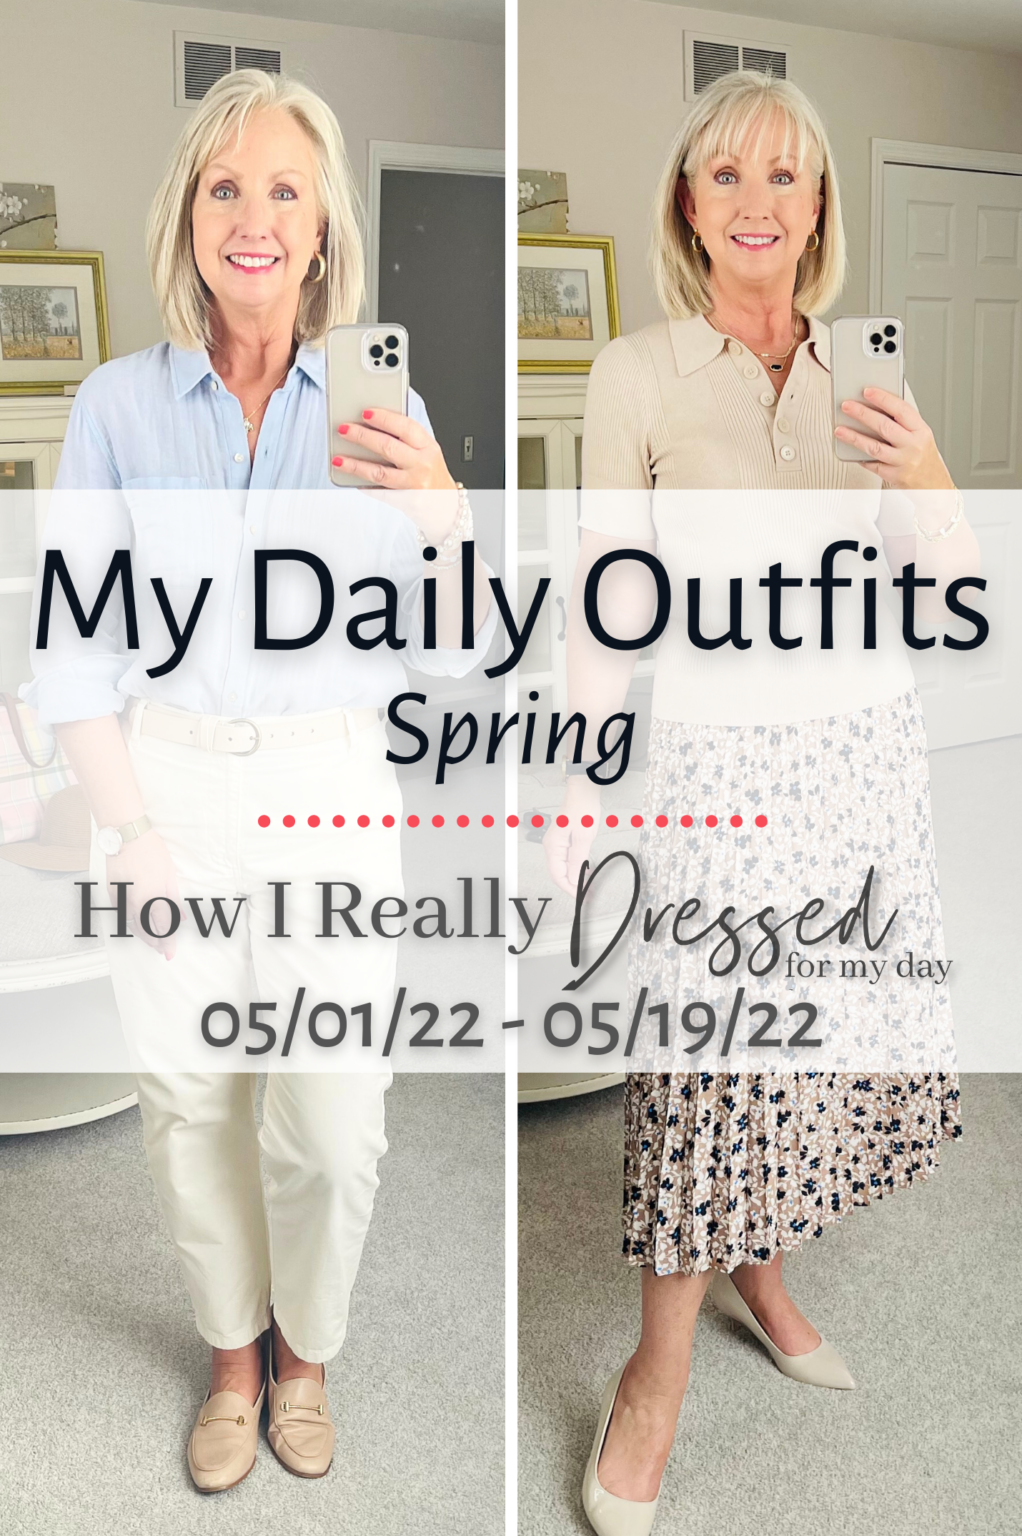 Spring Outfits I've Worn Recently - Dressed for My Day